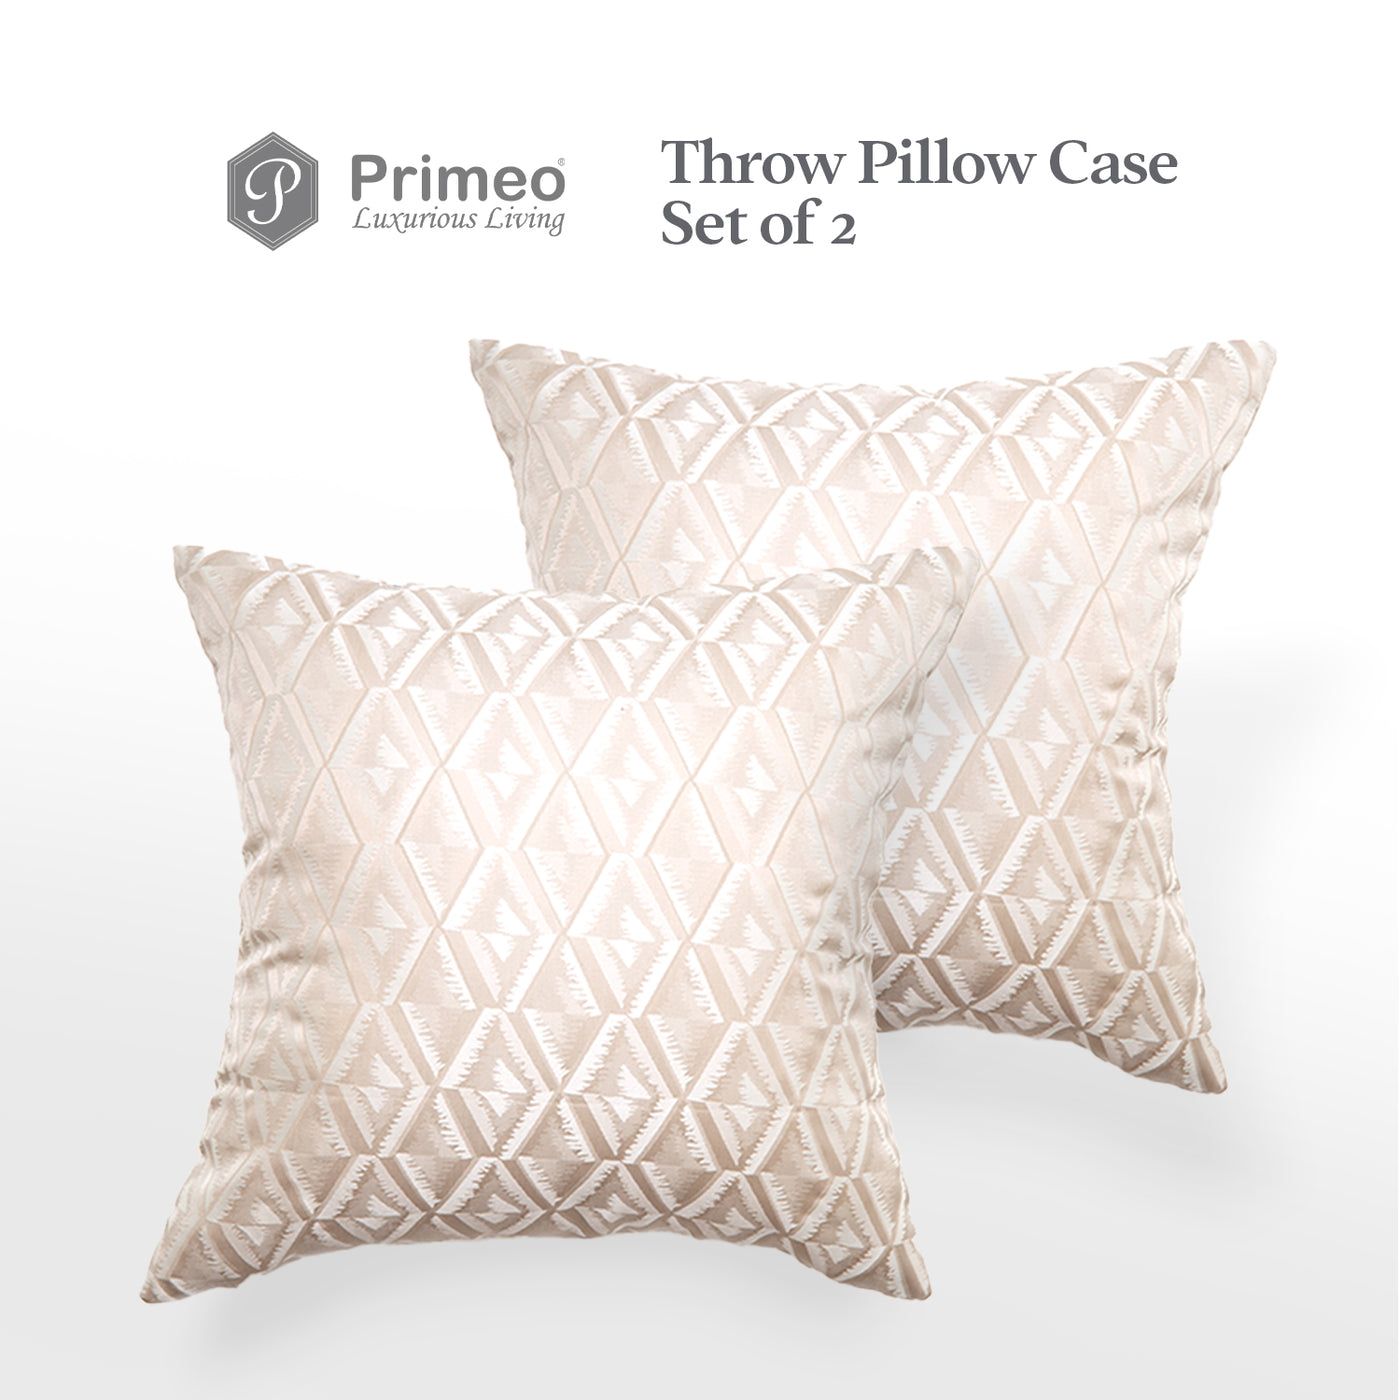 PRIMEO Throw Pillow Cover Set of 2 Made of Polyester